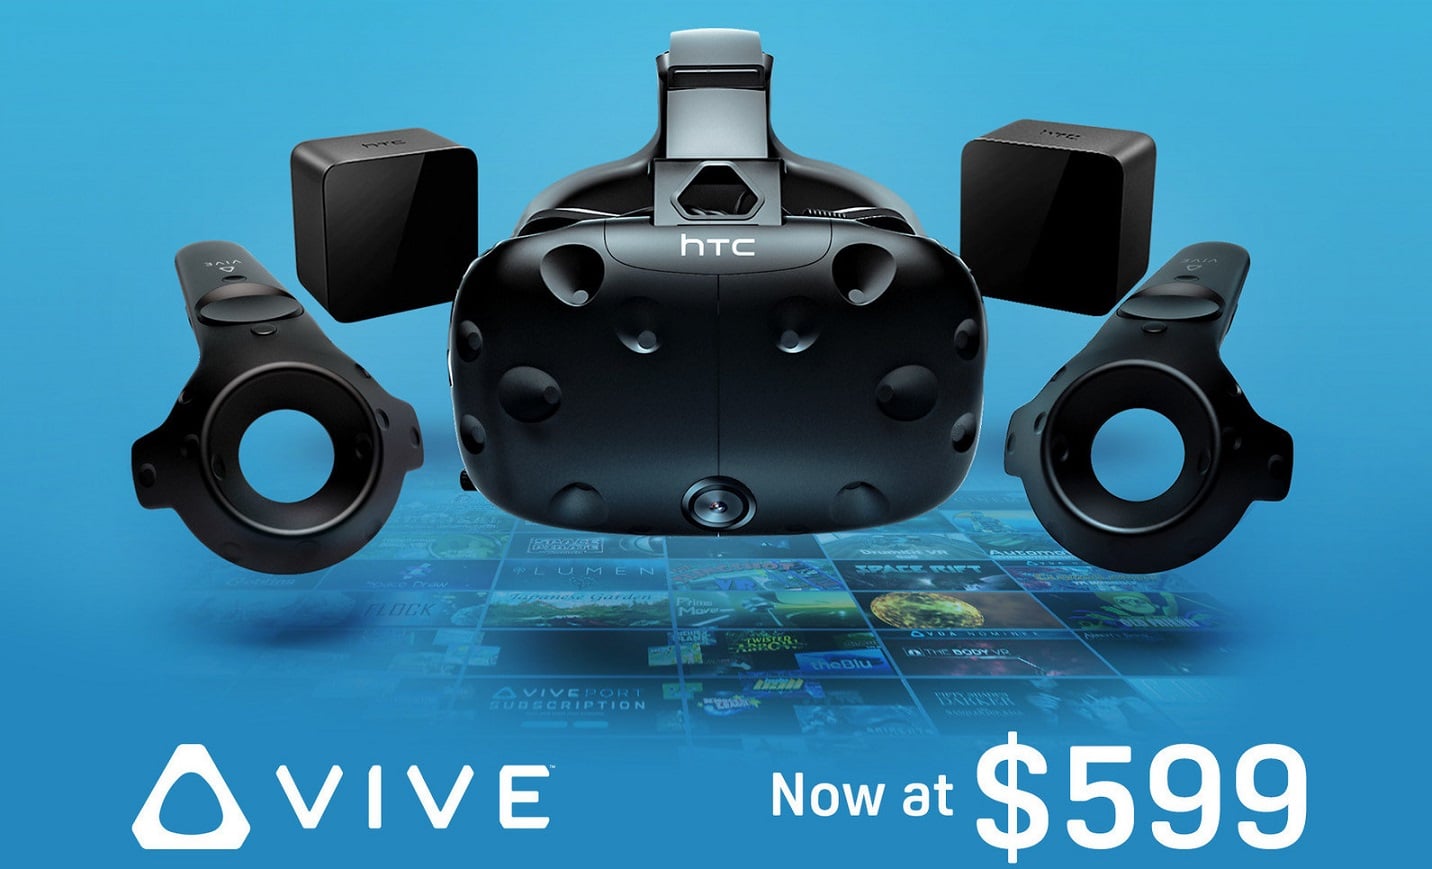 HTC Vive Price Cut by $200, Now Priced at $599